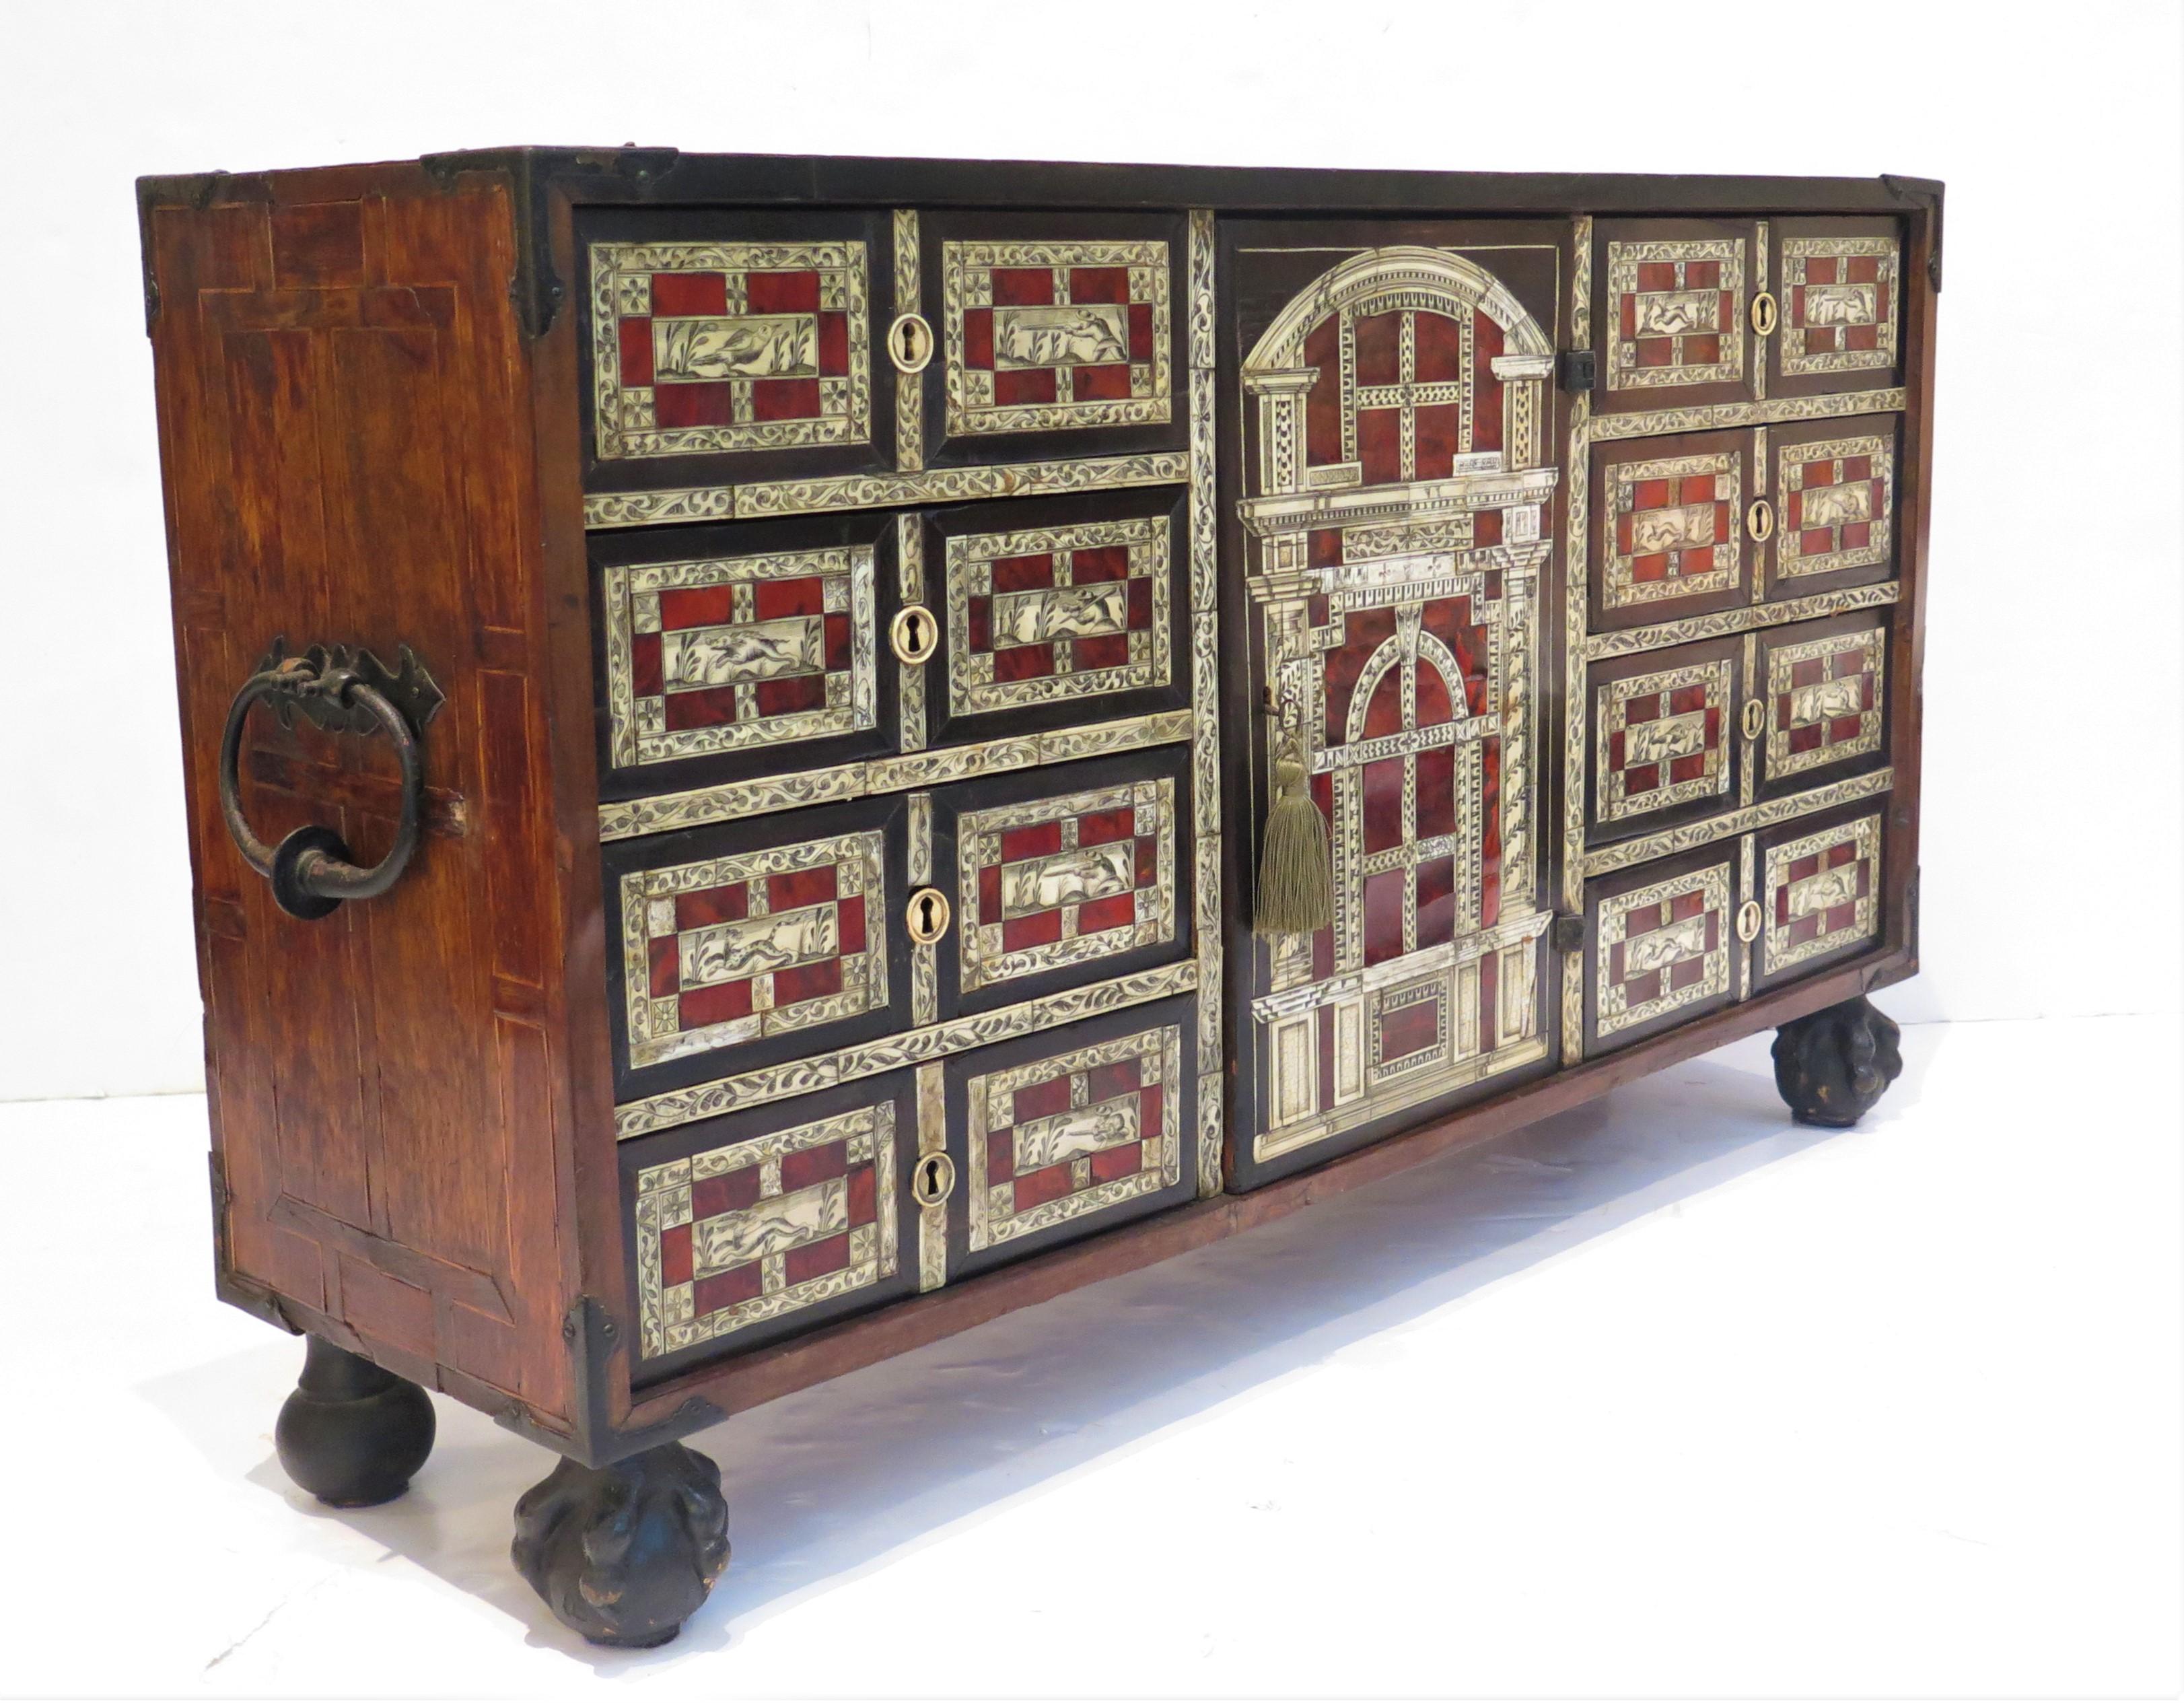 Spanish Baroque walnut vargueño / collectors cabinet / traveling table cabinet with highly detailed / decorated bone inlay and trim, wrought iron mounted, Spain, late 17th century  